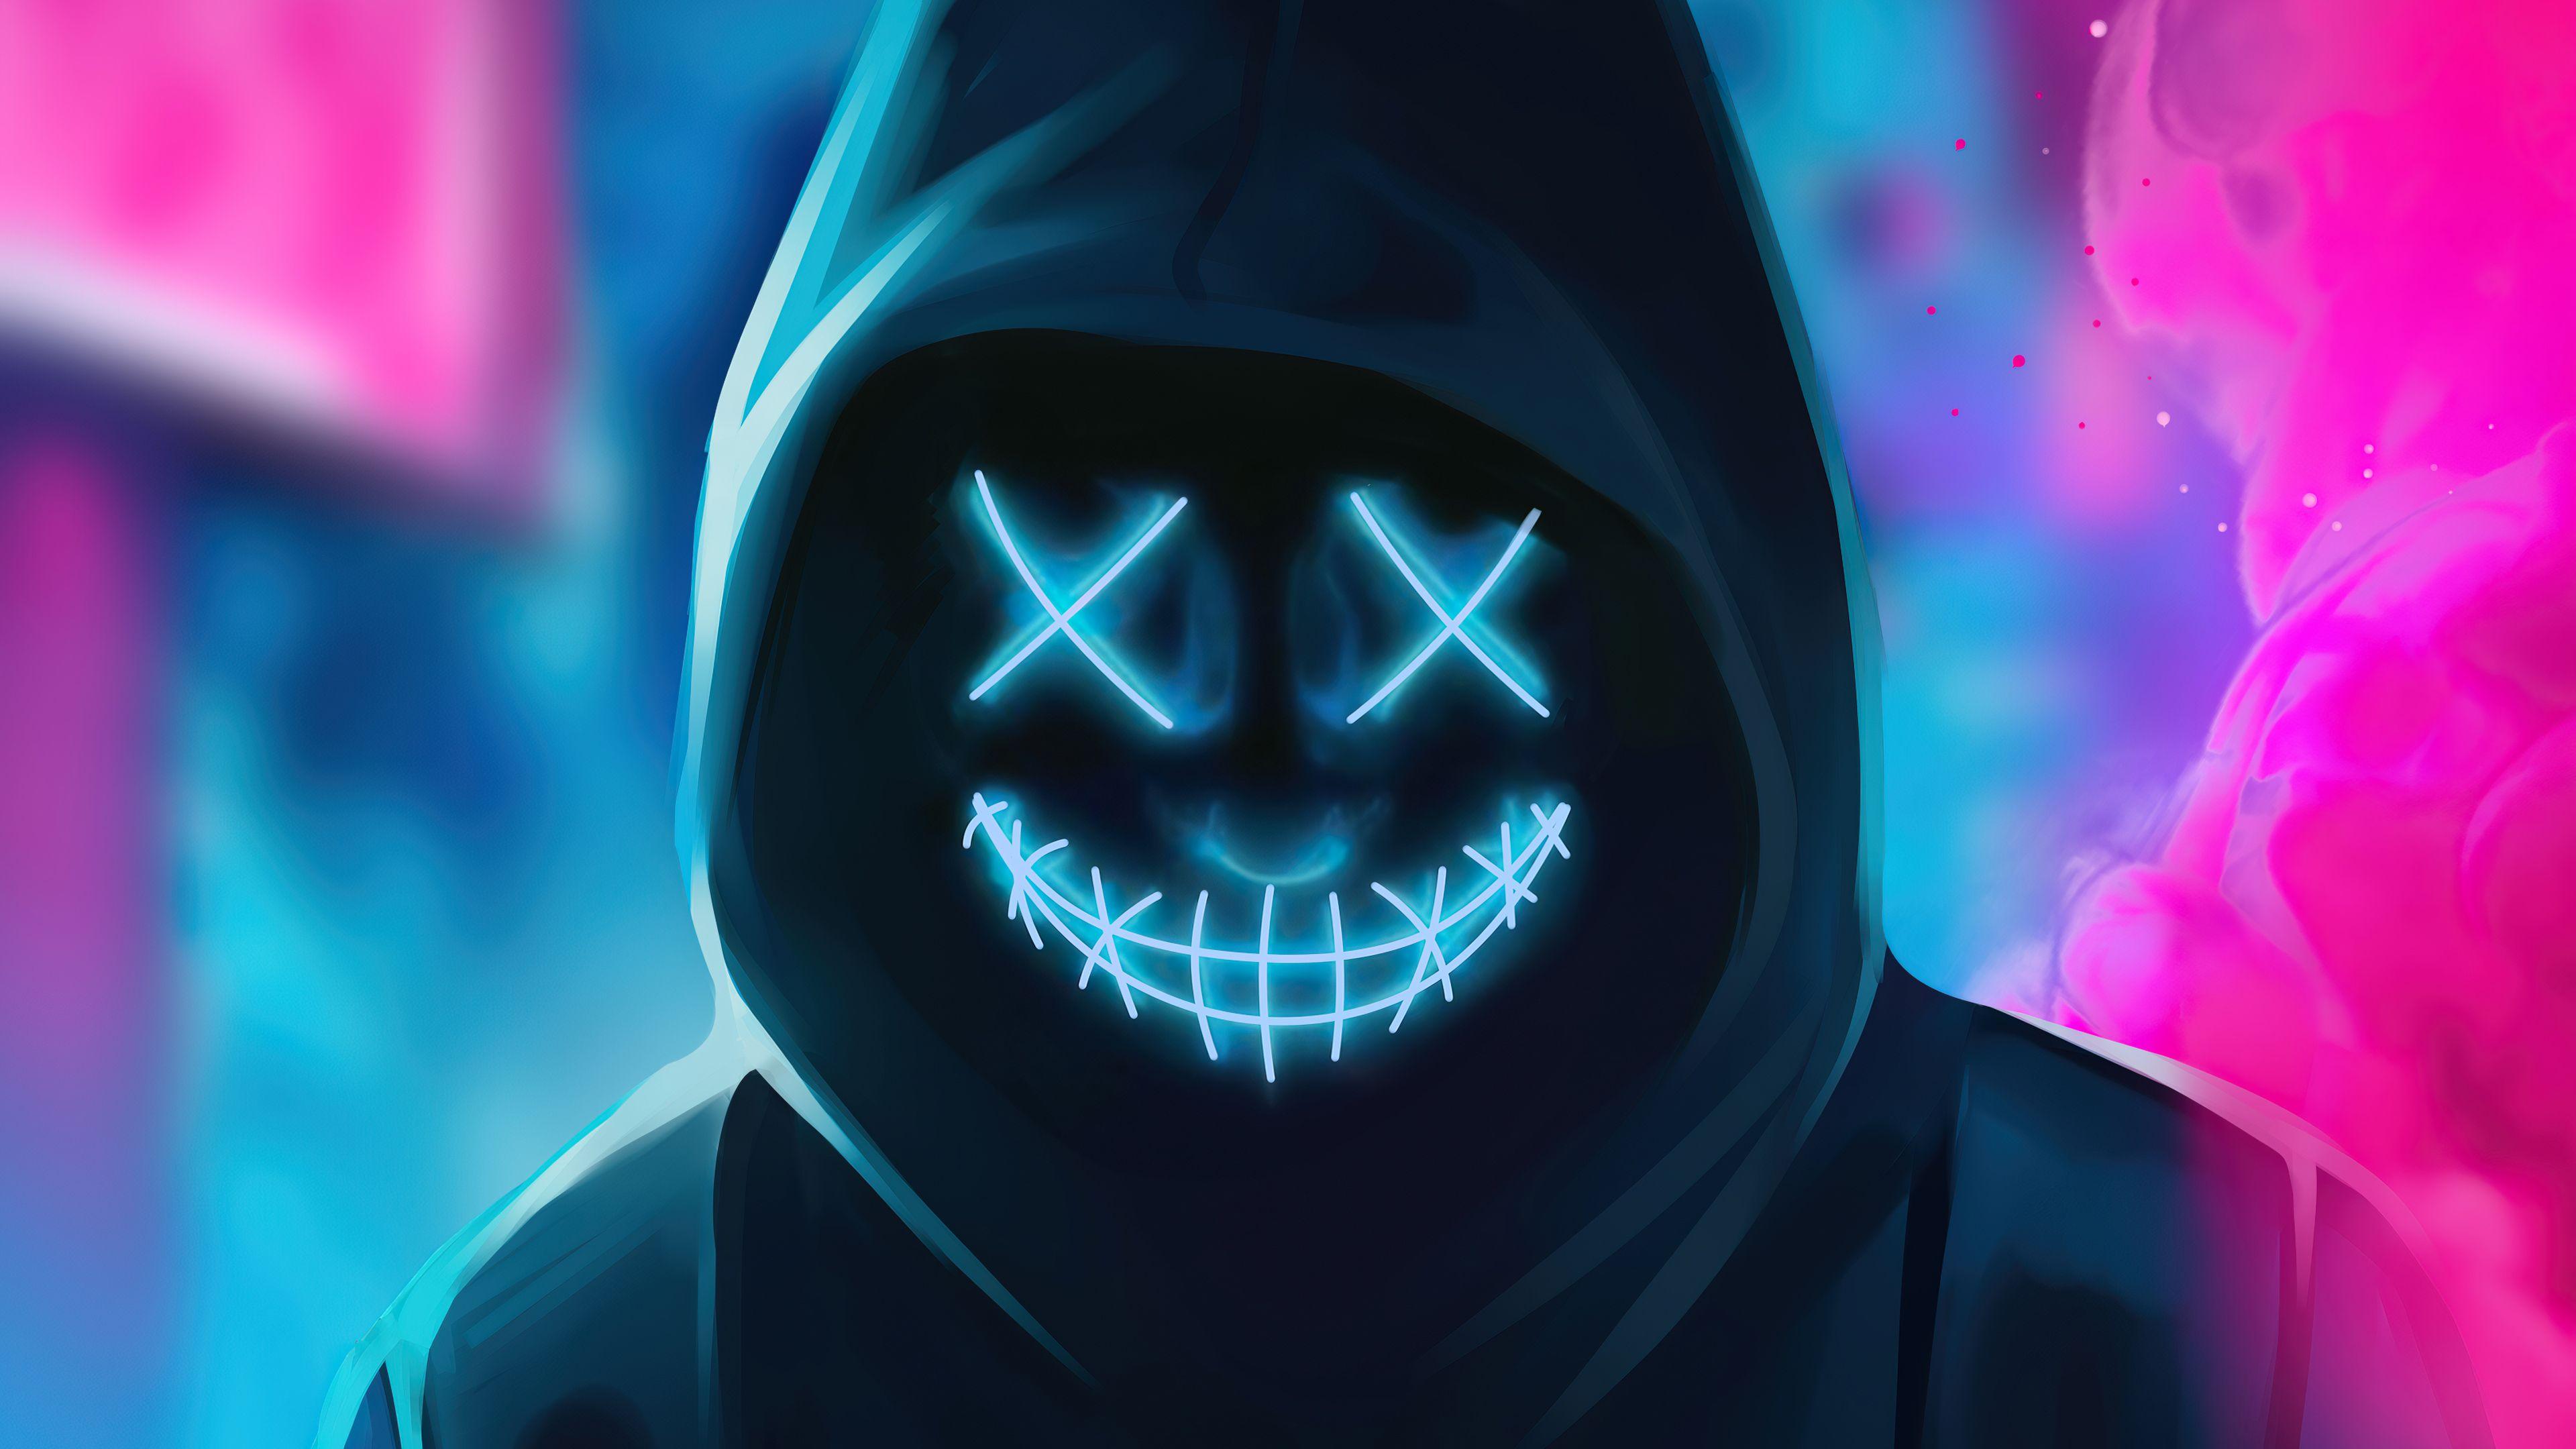 Smile Mask Wallpapers - Top Free Smile Mask Backgrounds - WallpaperAccess